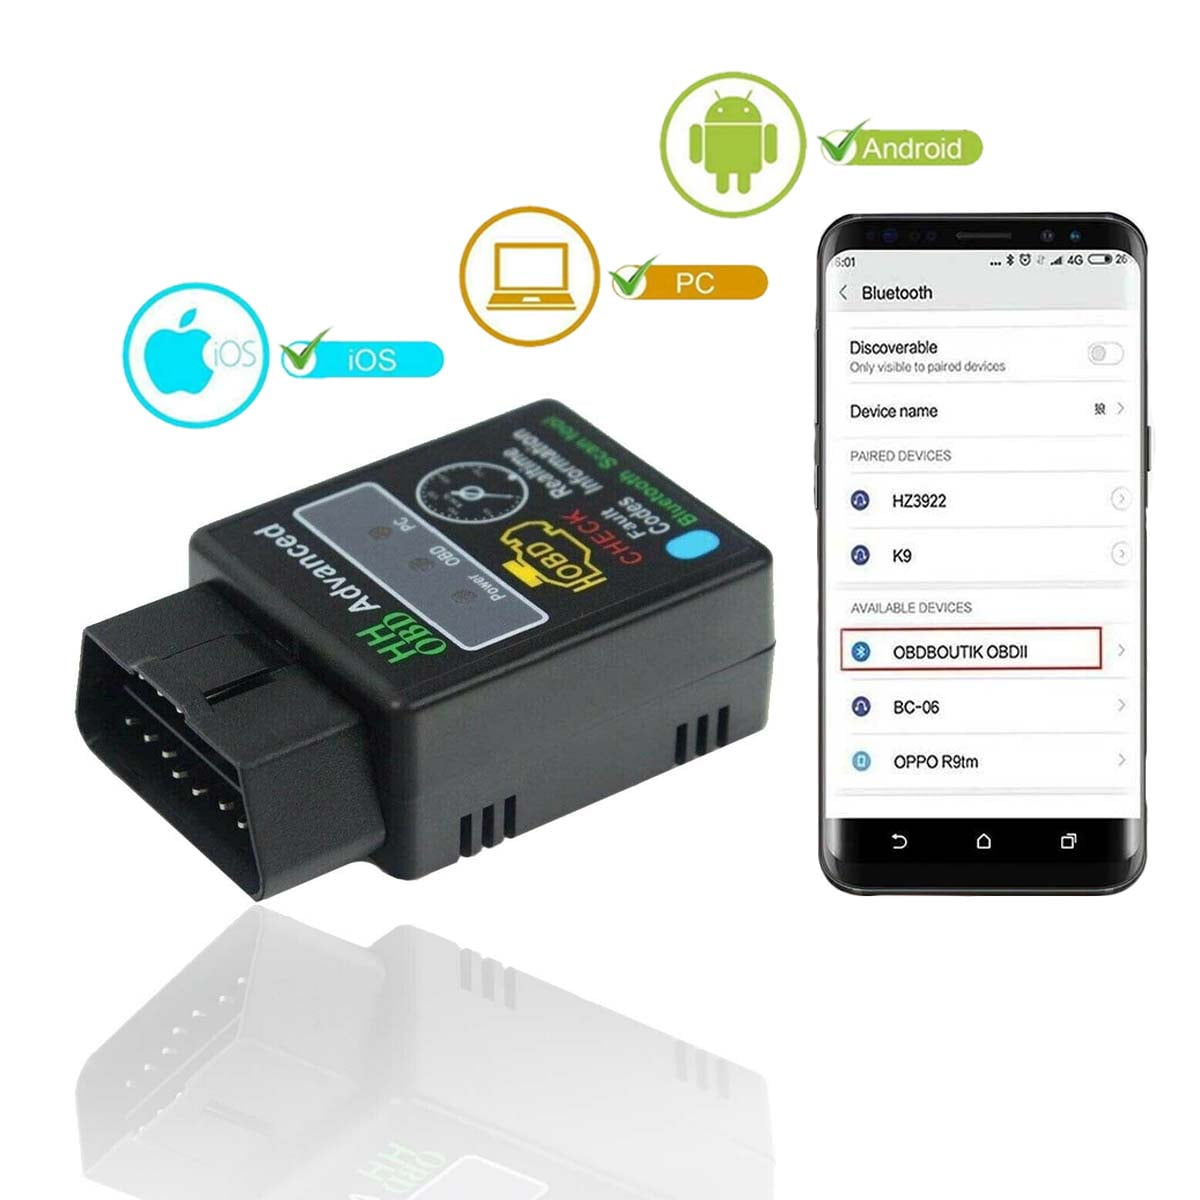 ELM327 OBD2 V2.1 Bluetooth Car Auto Diagnostic Interface Scanner Tool at Rs  495, High voltage motor generator tester in New Delhi